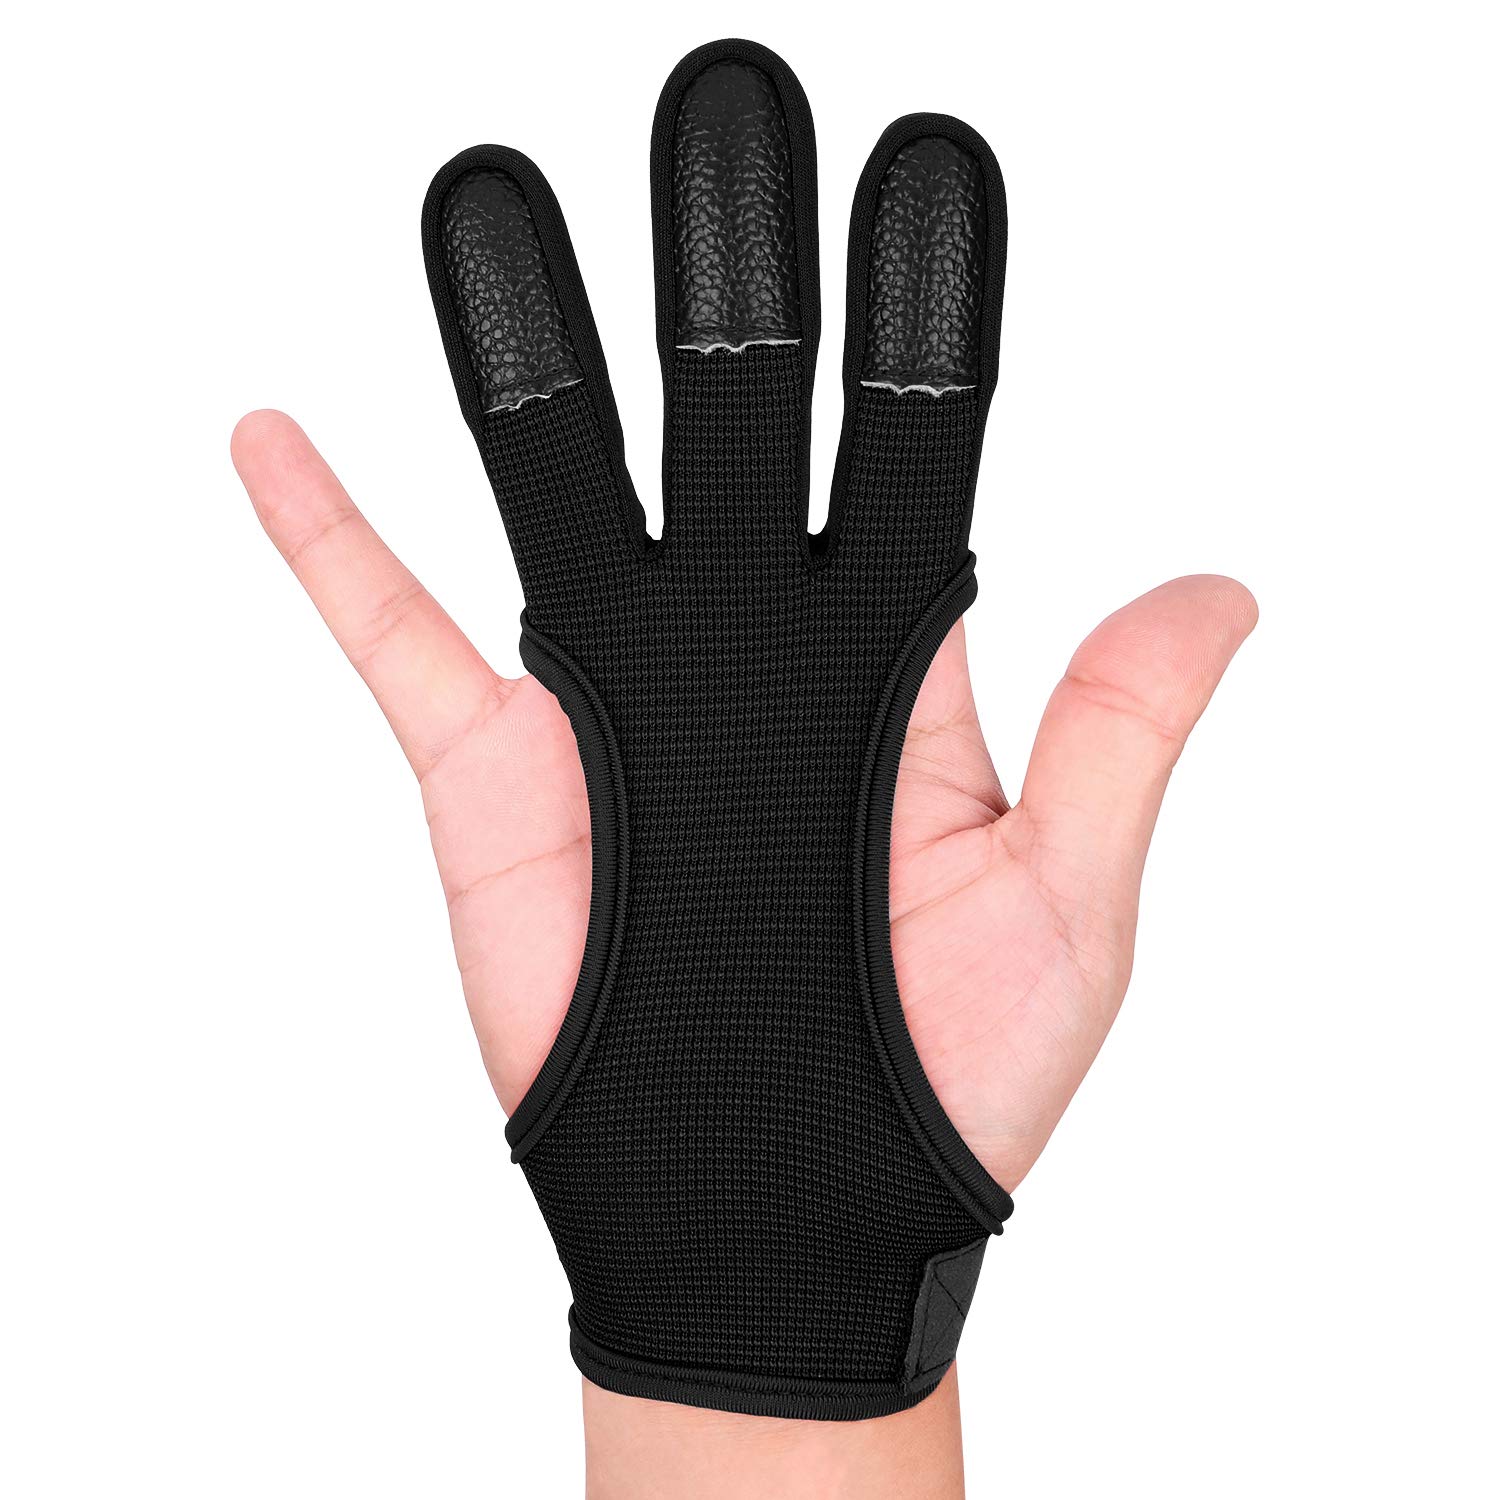 FitsT4 Archery Gloves Leather Padded Three Finger Protector Bow Shooting  Hunting Non Slip Glove for Kids Youth Adult Beginner 1-black Medium